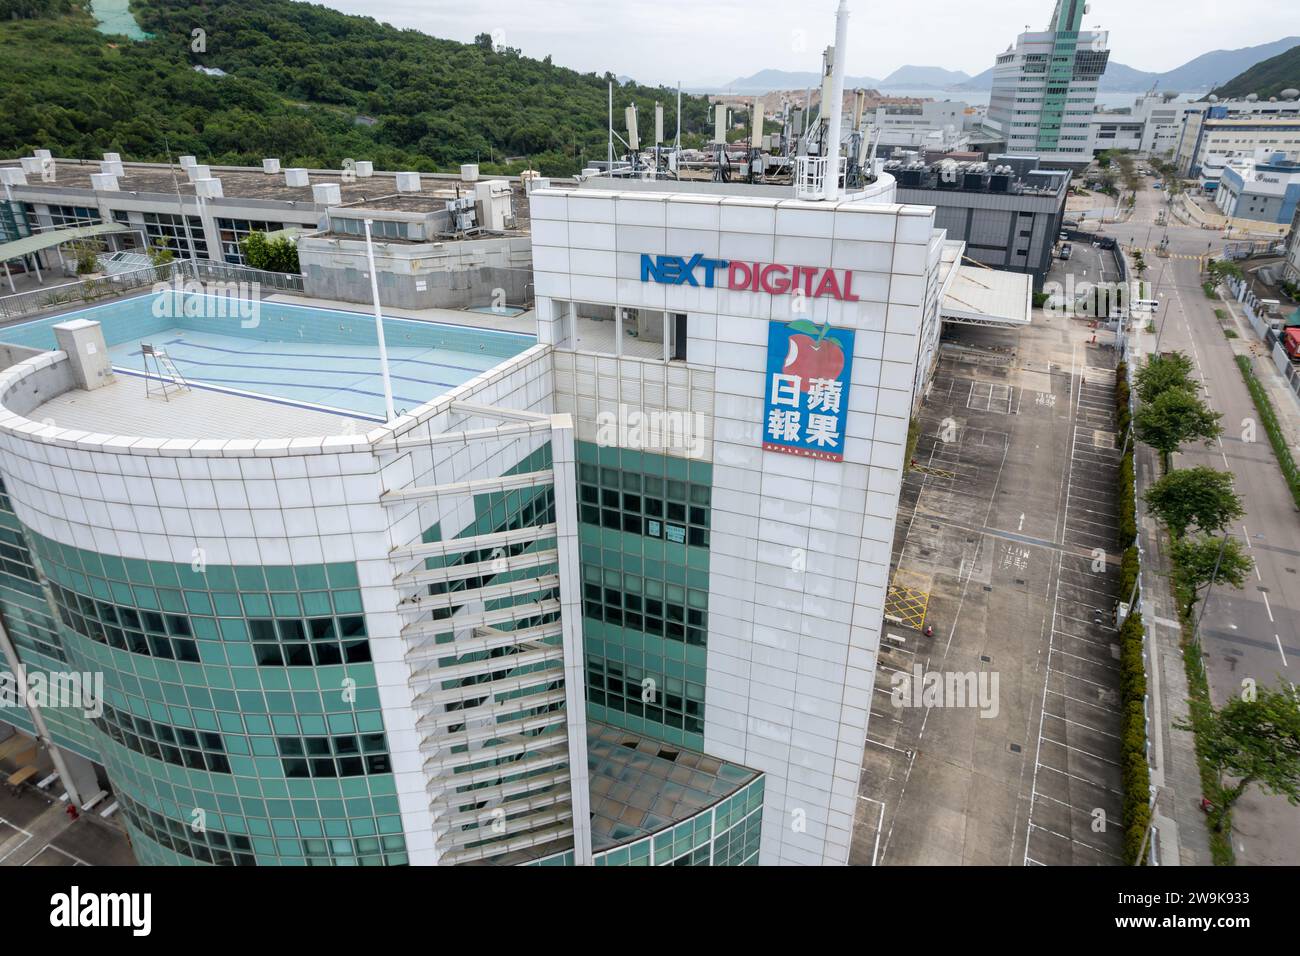 Hong Kong - 6 Oct 2021: A aerial view of the headquarters office of the Apple Daily newspaper, published by Next Digital Ltd., is seen at Tseung Kwan Stock Photo